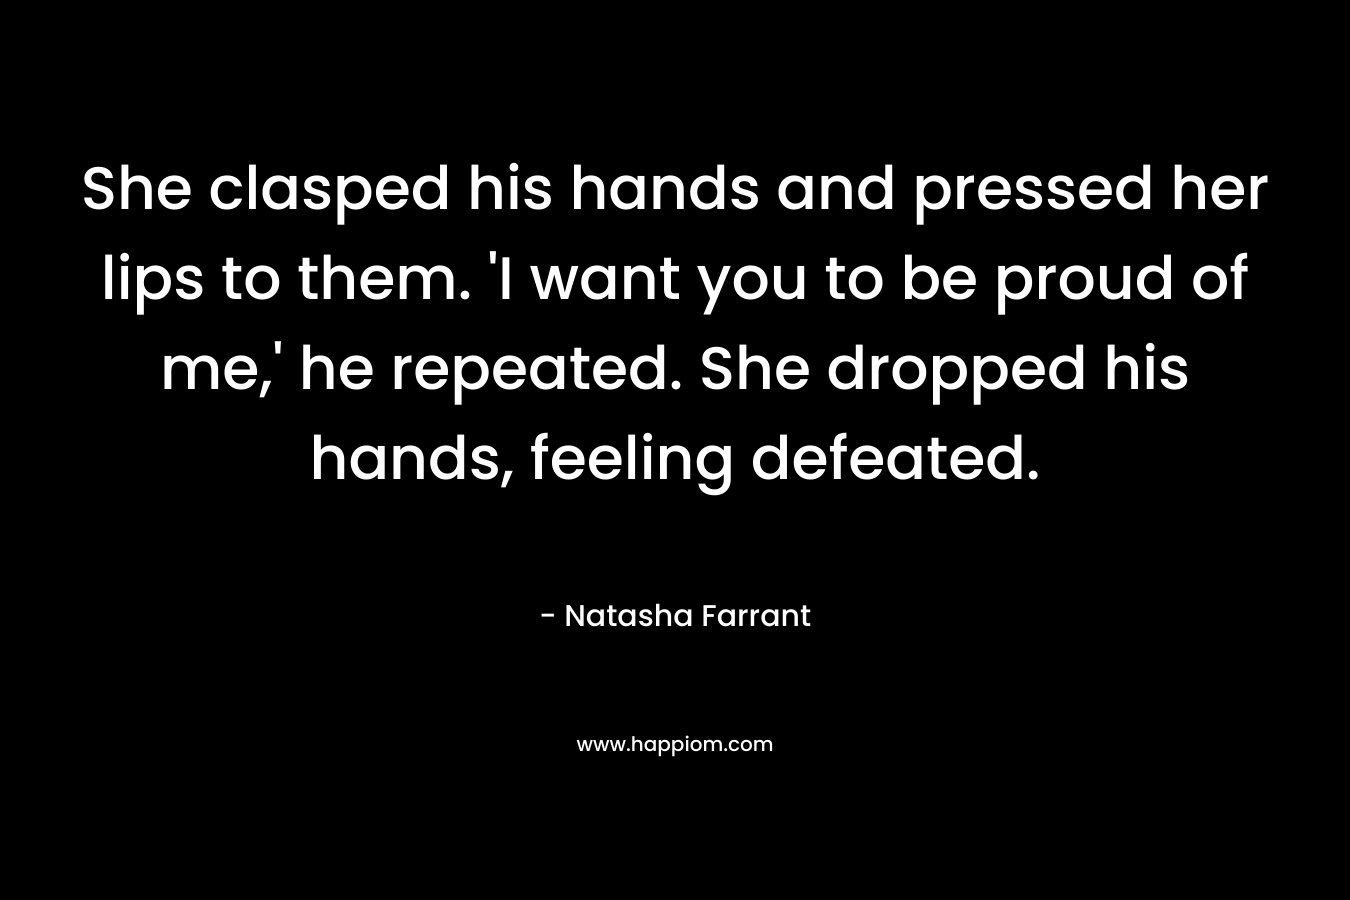 She clasped his hands and pressed her lips to them. ‘I want you to be proud of me,’ he repeated. She dropped his hands, feeling defeated. – Natasha Farrant